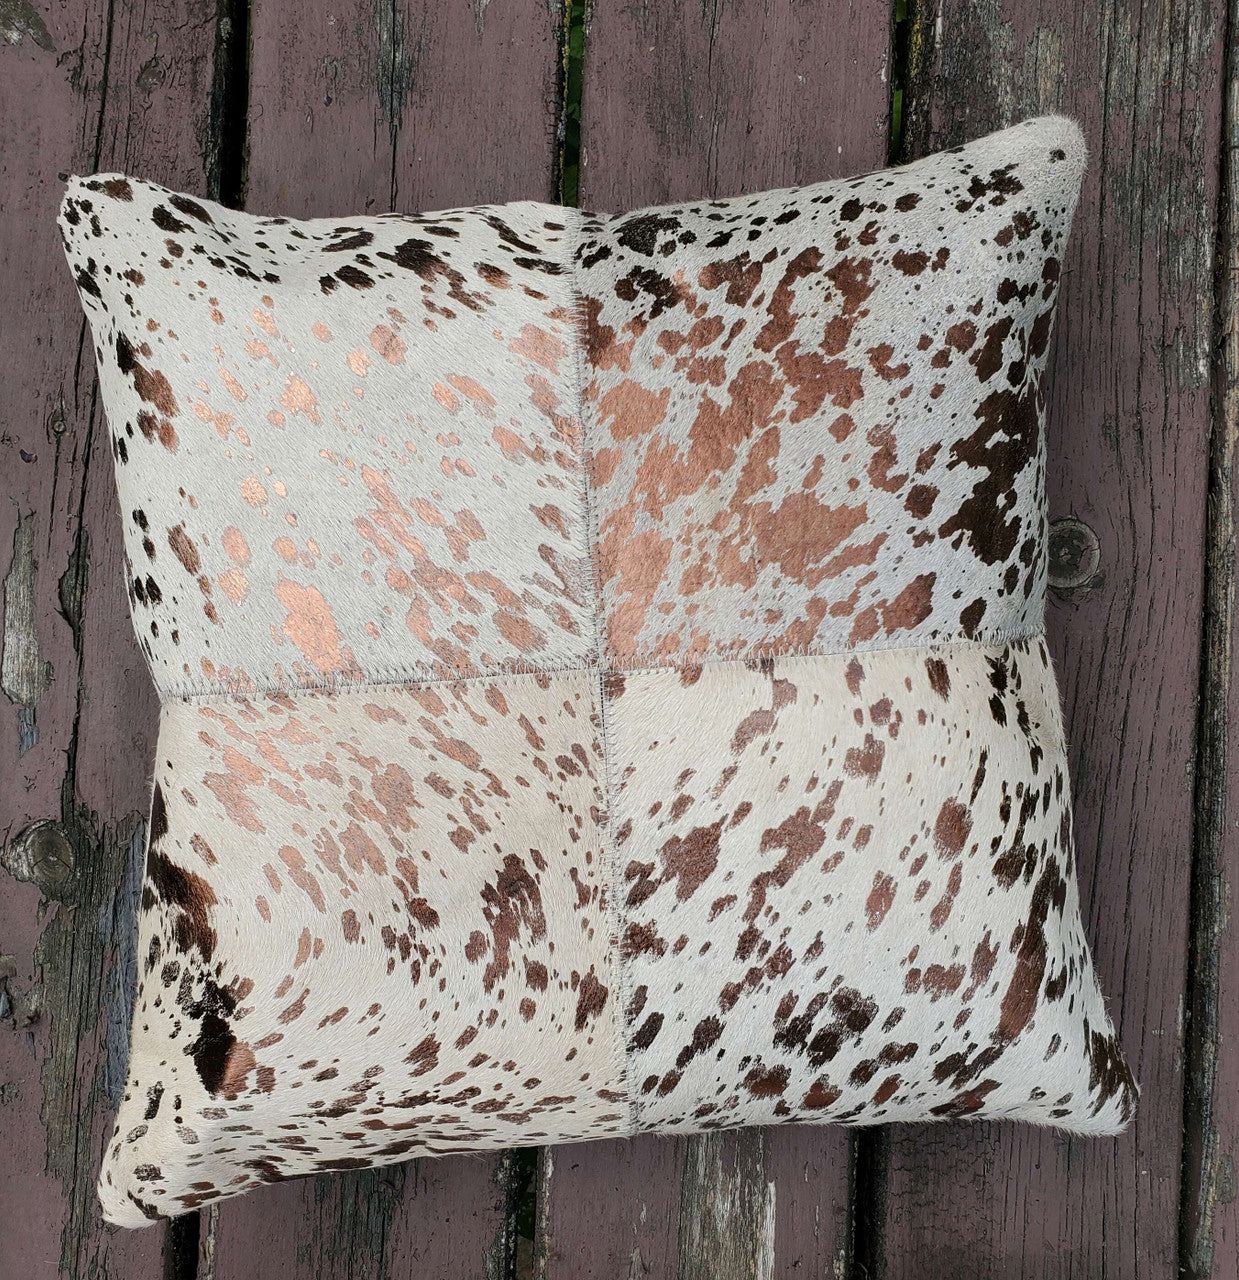 These cowhide pillow are exactly shown, work is of highest quality and the metallic cowhide is very attractive. It looks just like the photo. 

